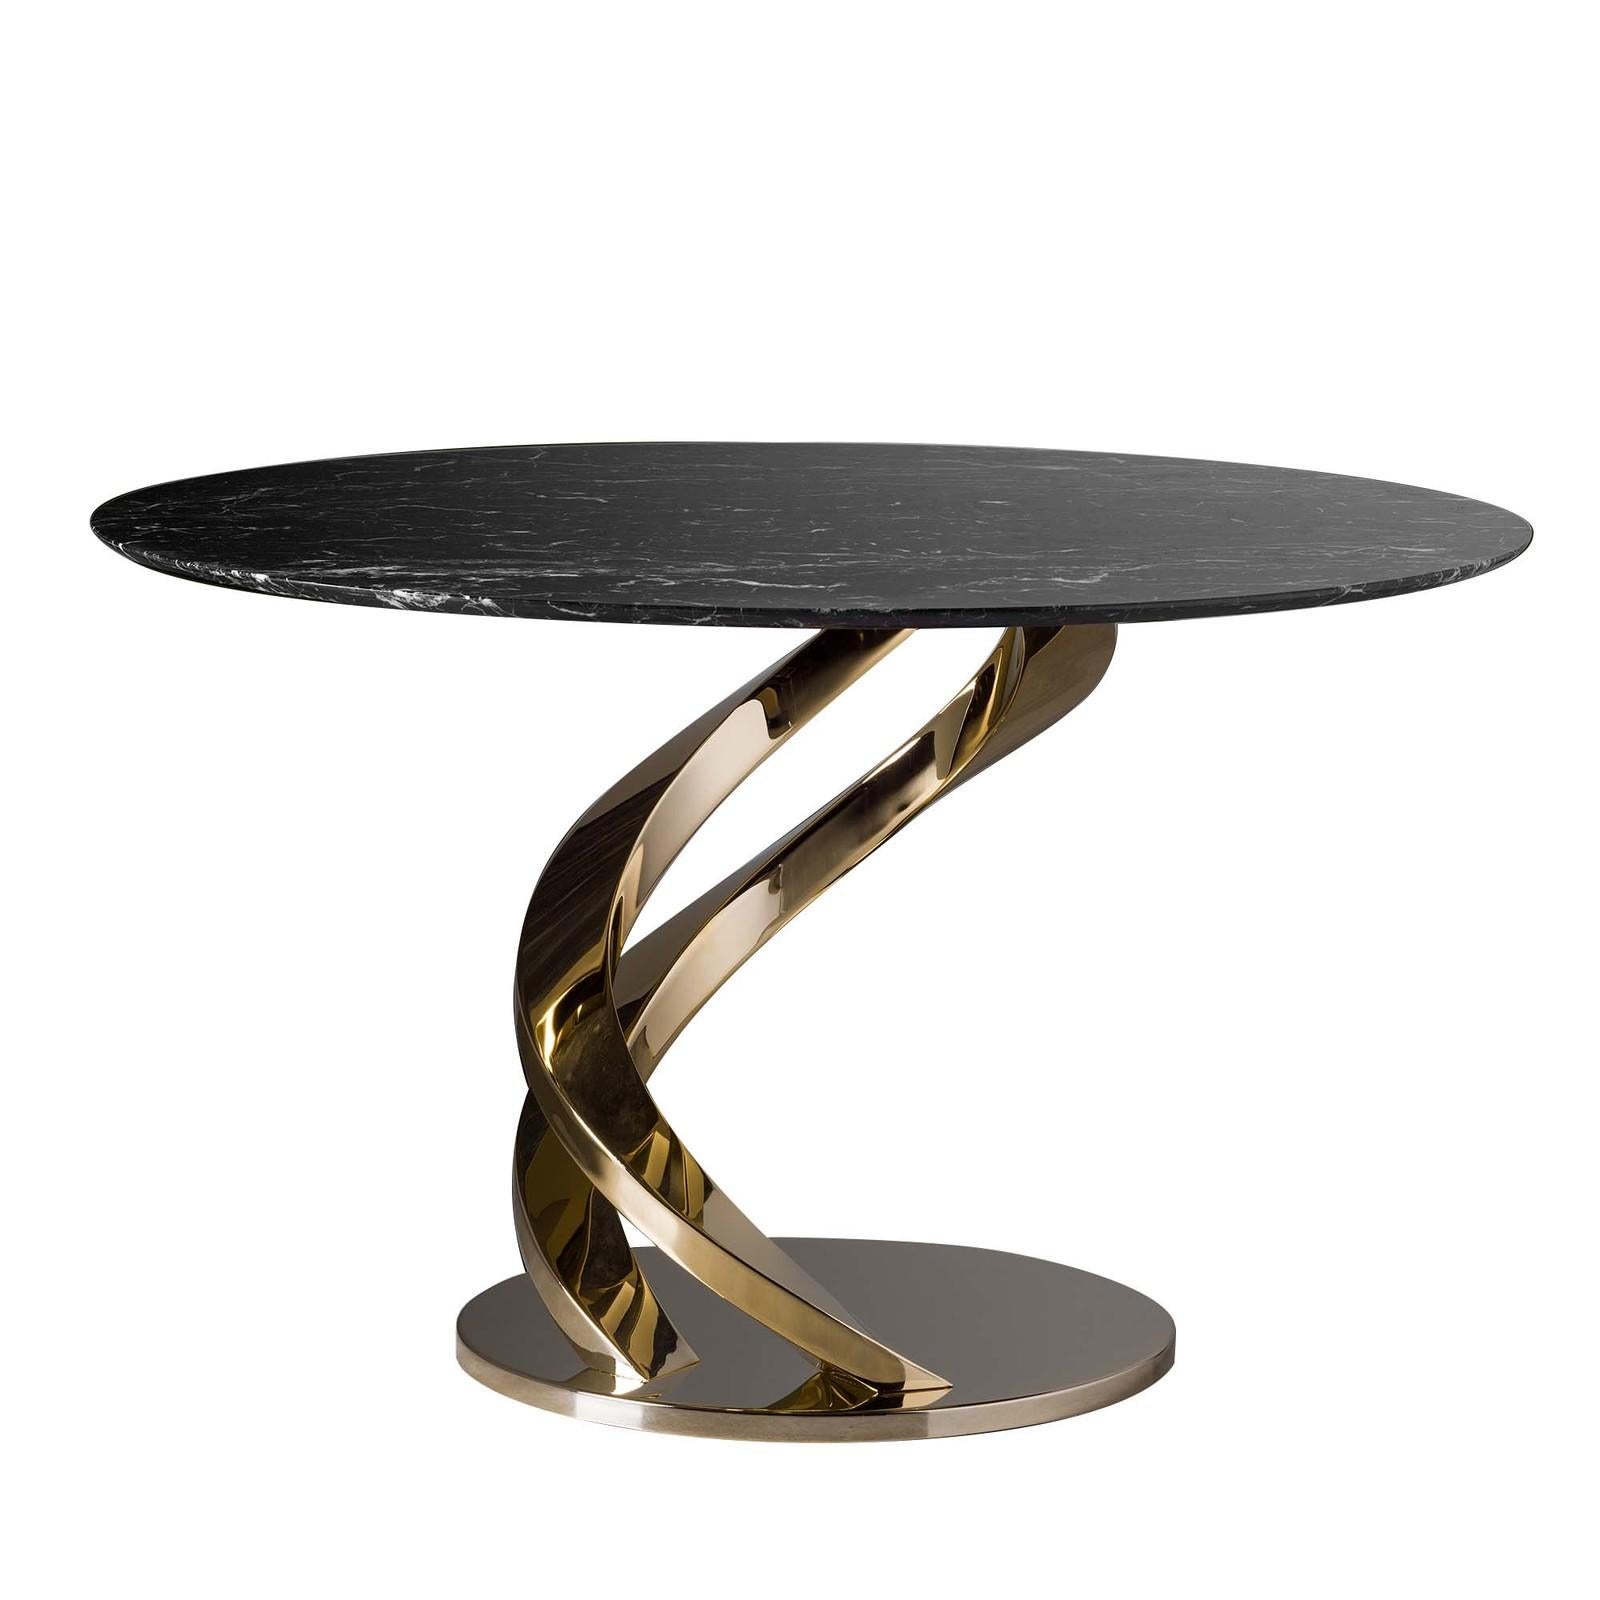 This stunning dining table is the epitome of elegance with its structure in stainless steel covered in 24-karat glossy gold comprising a series of spiraling elements that add dynamism to the composition and function as support for the round black